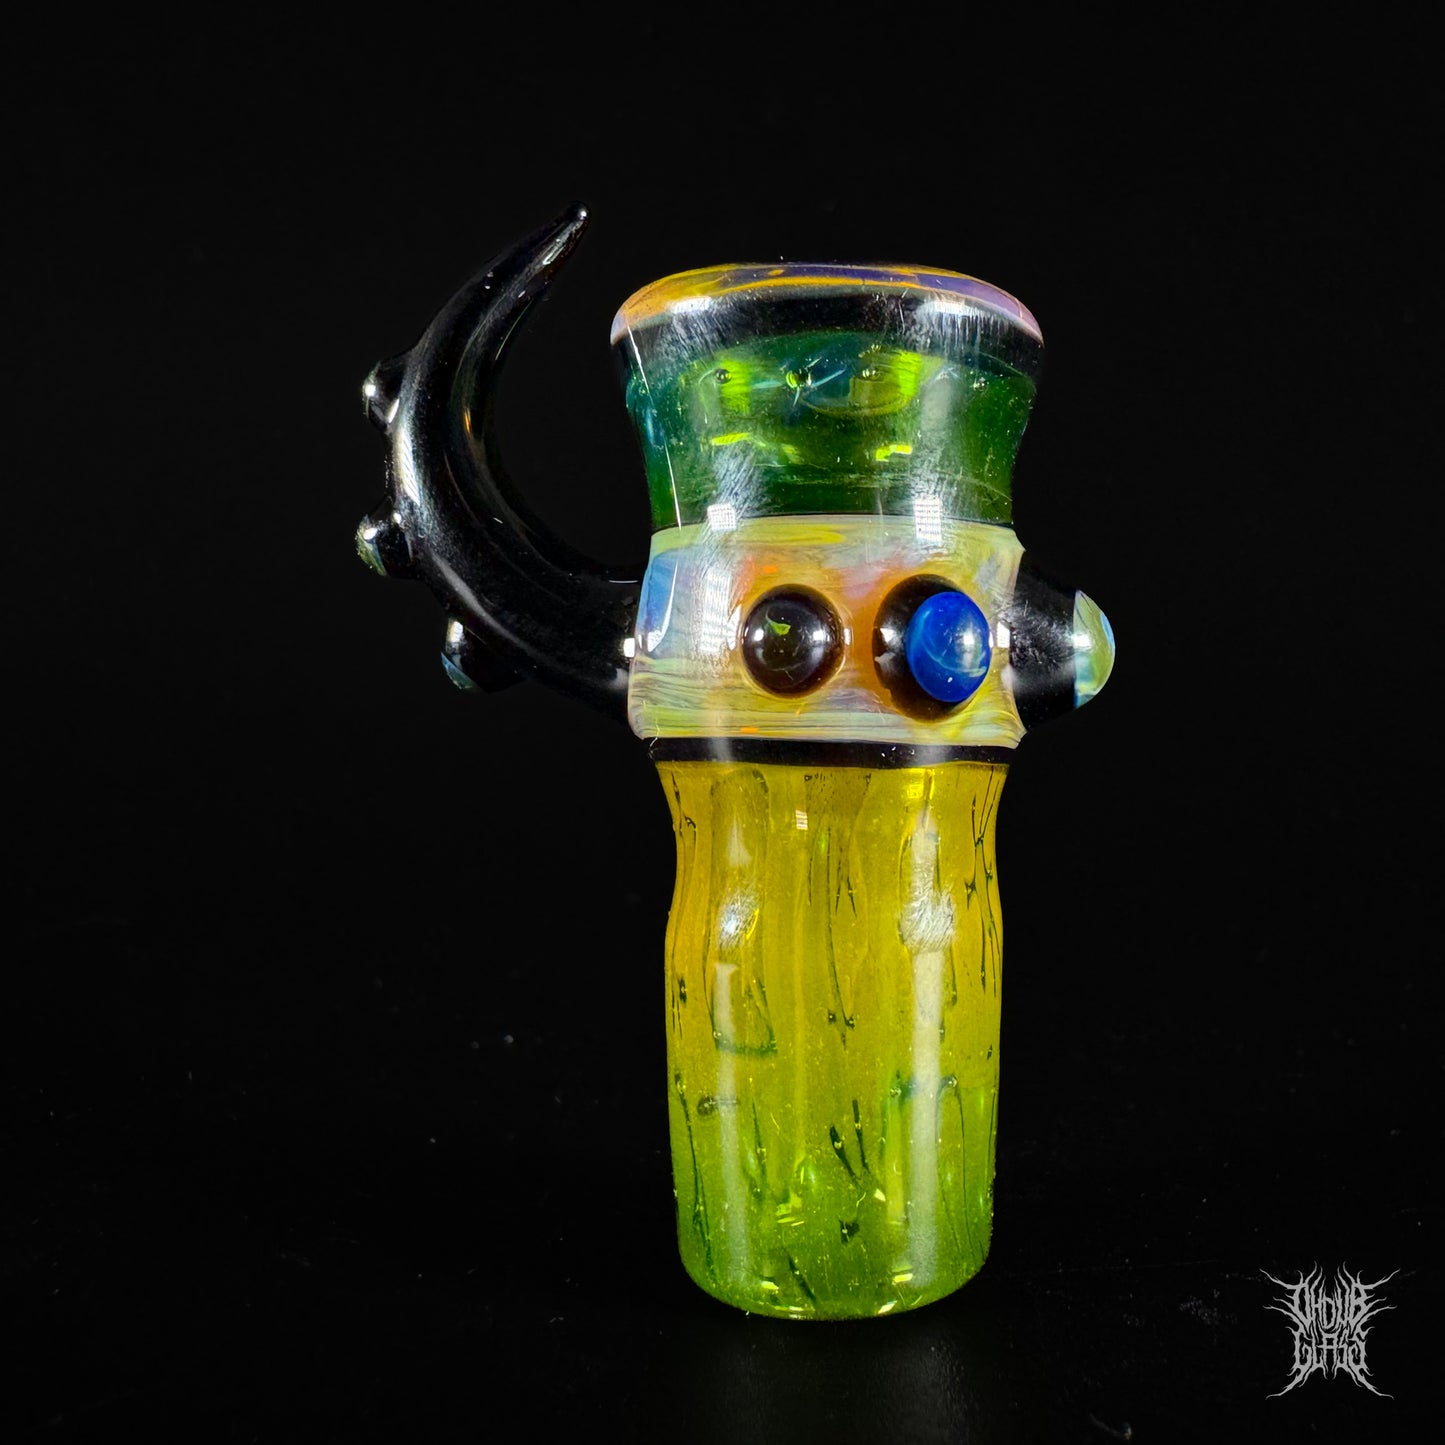 OhDub 18mm 4 Hole Rune-Tech Slide (Fully Worked Bowl)